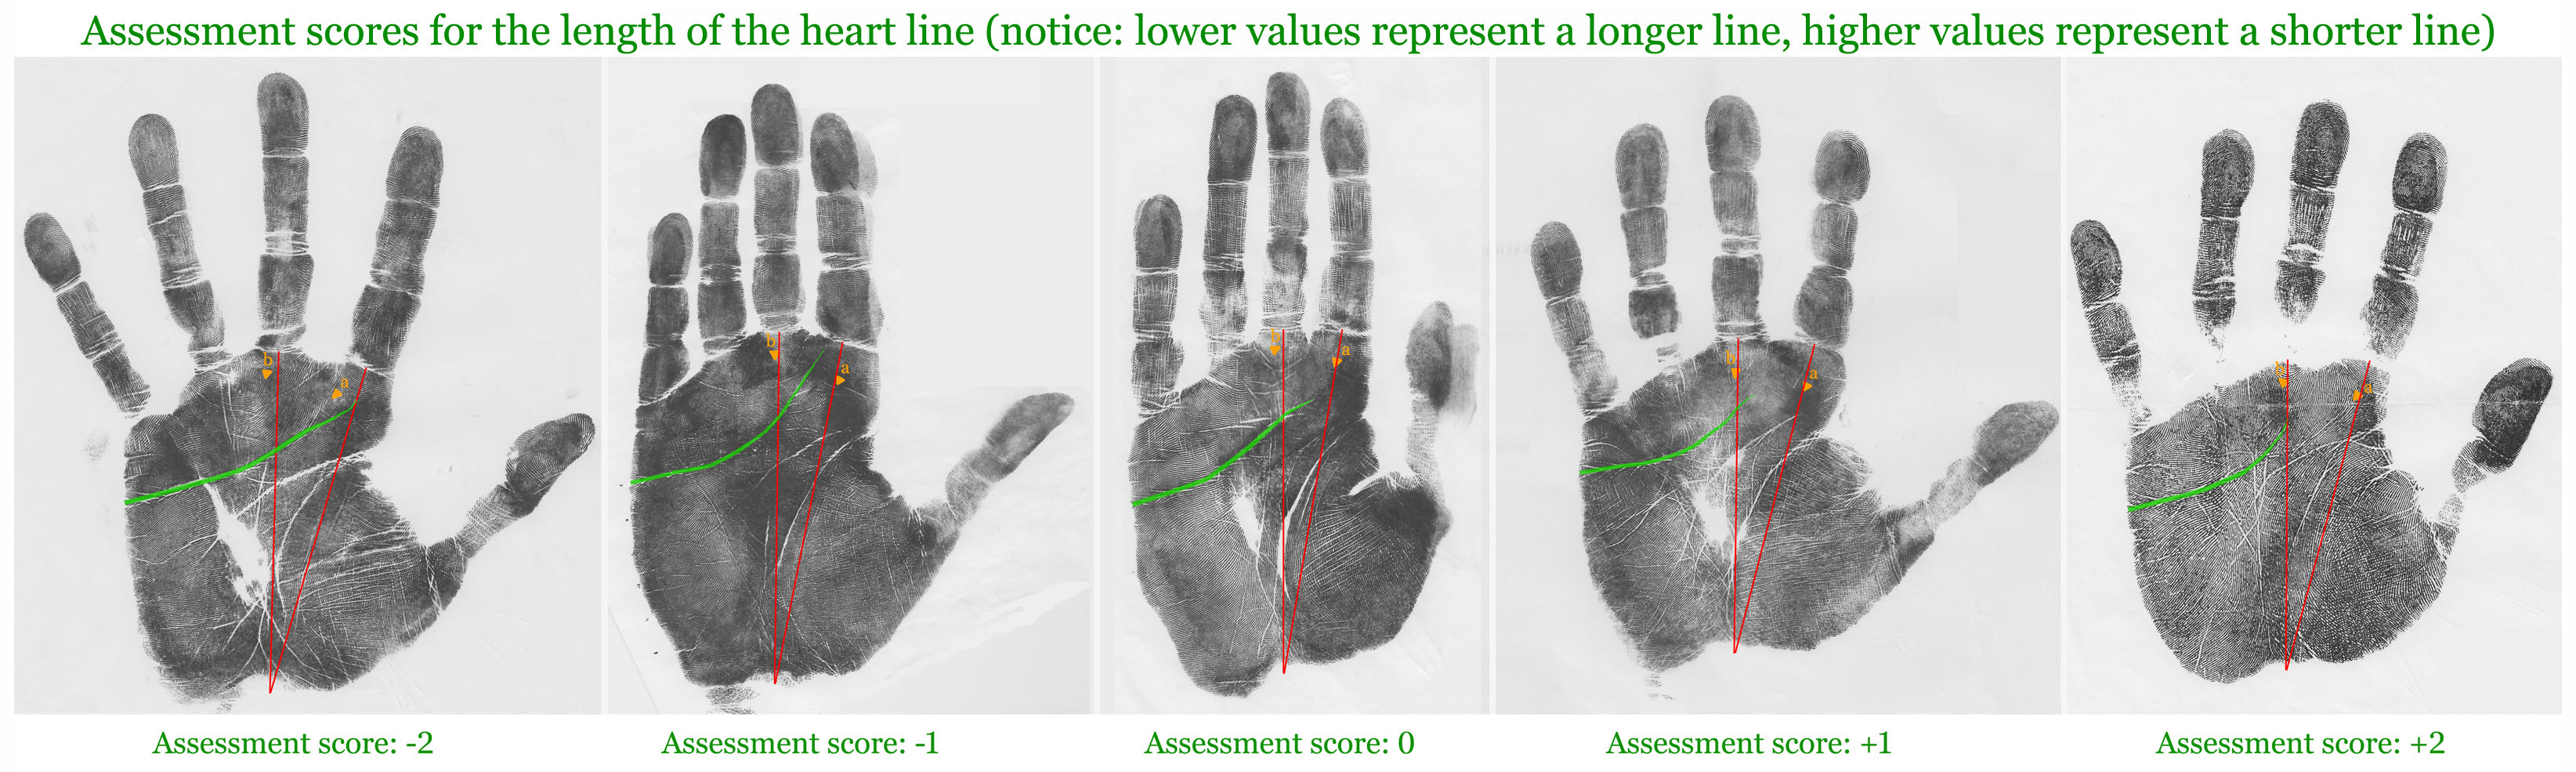 Assessment scores for the length of the heart line [upper transverse crease].